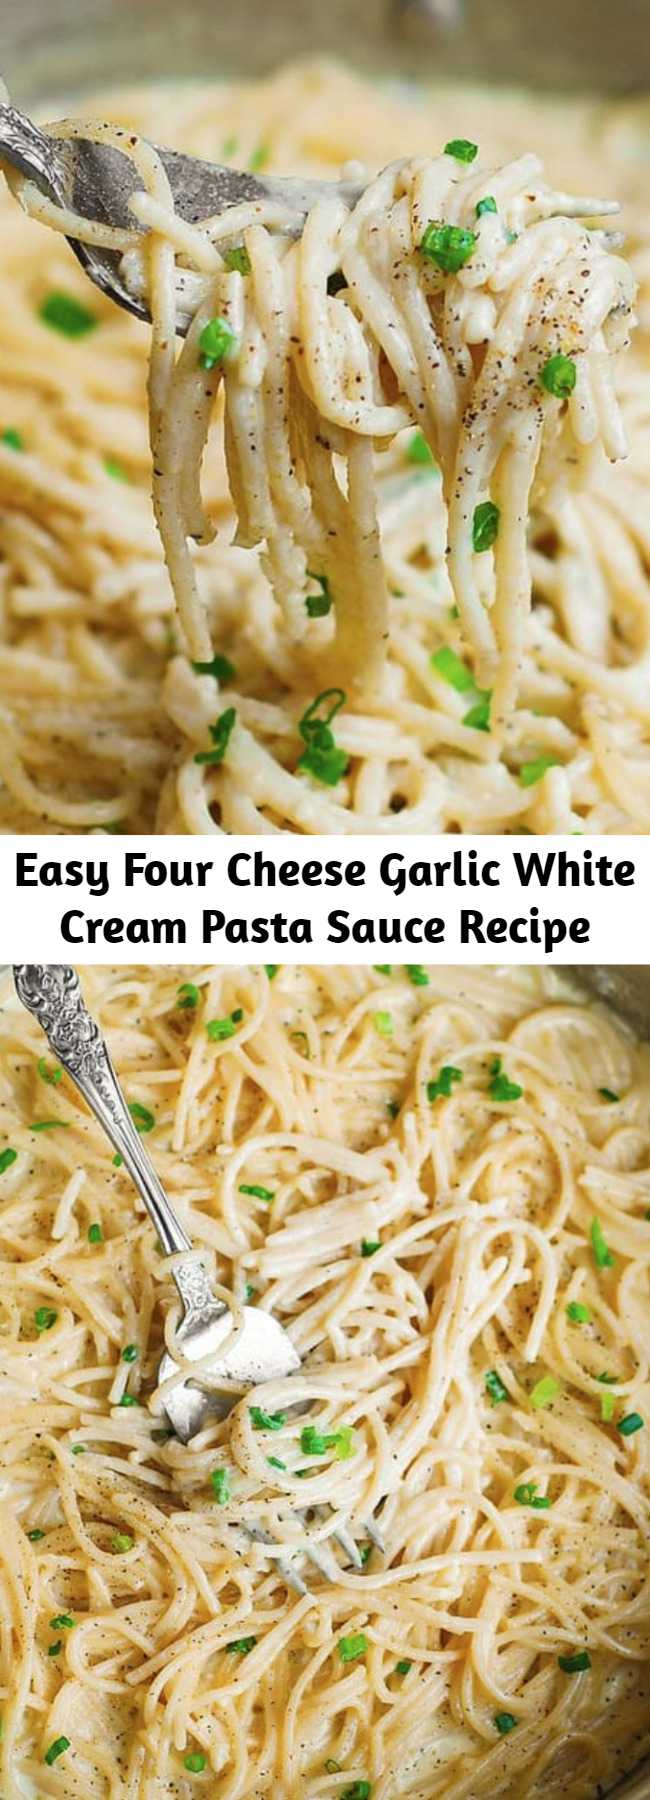 Easy Four Cheese Garlic White Cream Pasta Sauce Recipe - Simple ingredients, easy cooking instructions.  This Creamy Garlic Spaghetti Sauce uses the 4-cheese blend which includes Mozzarella, White Cheddar, Provolone, Asiago cheeses.  This white cheese creamy pasta can be served as is, as side dish, or with grilled meats and veggies.  Super versatile and easy-to-make!